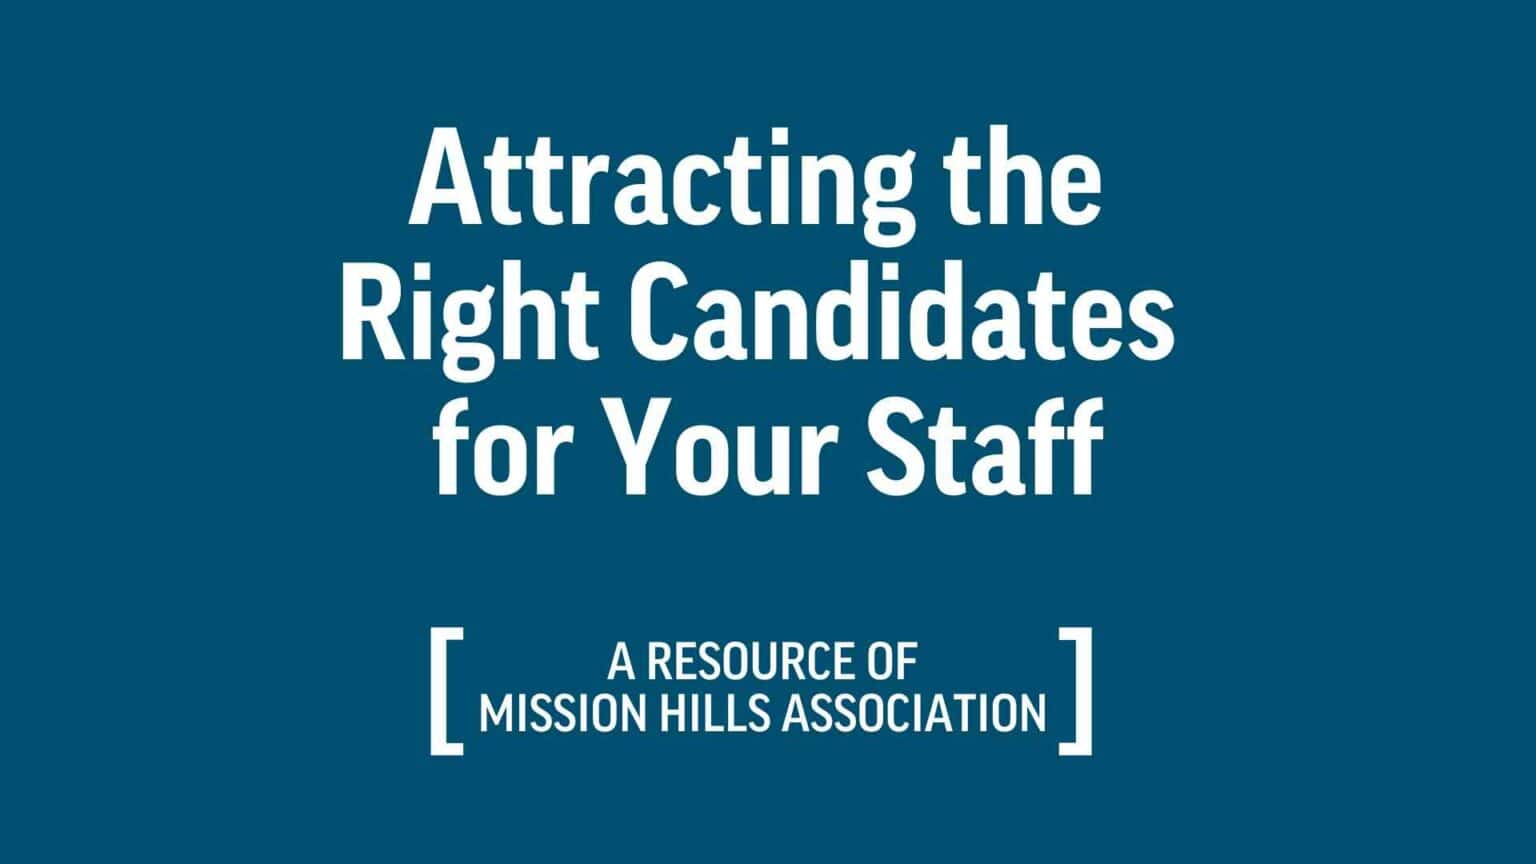 Attracting the Right Candidates for Your Staff